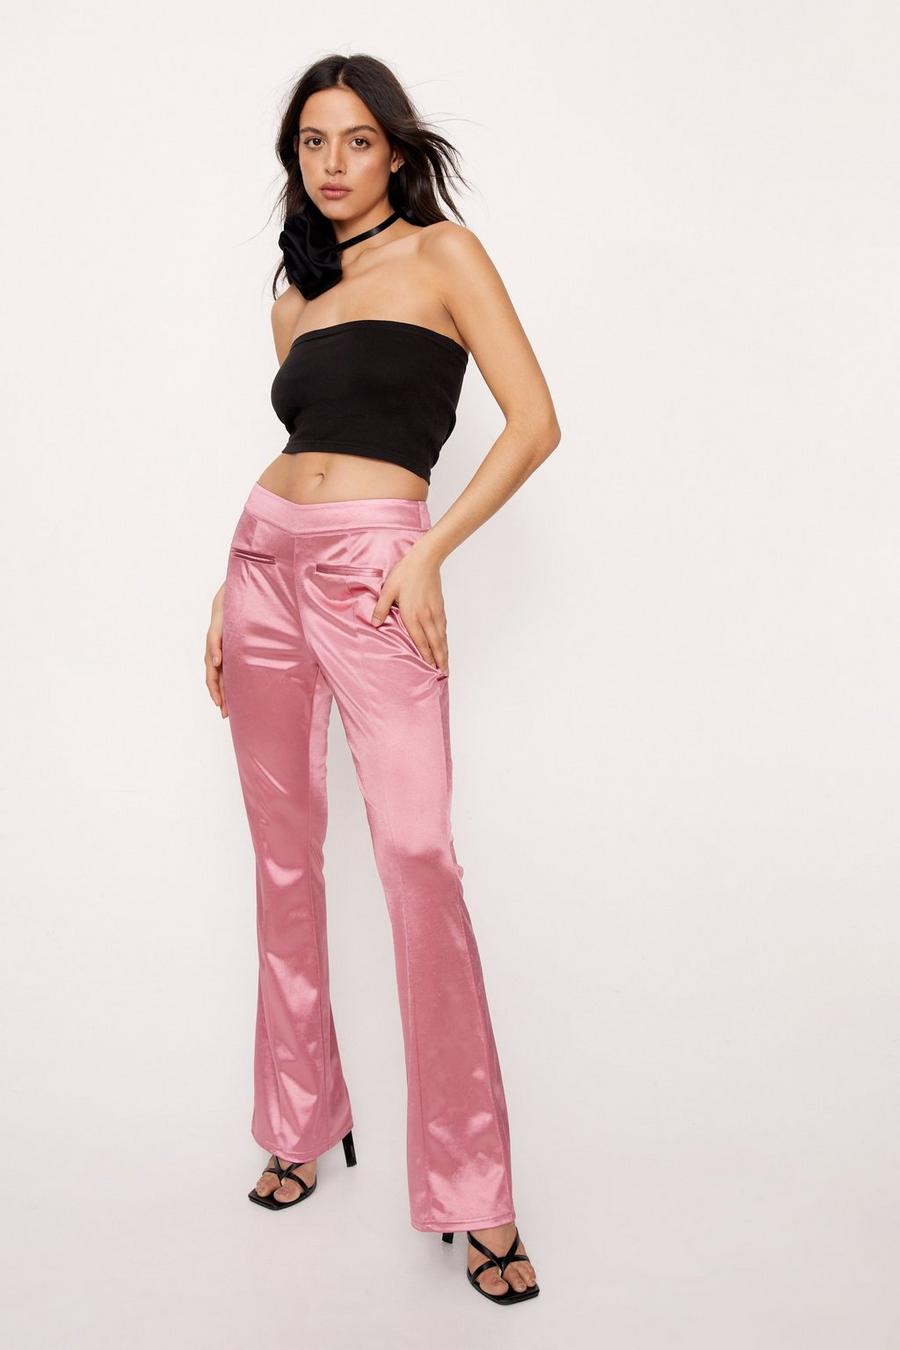 Women's Pink Trousers, Hot Pink & Dusky Pink Trousers